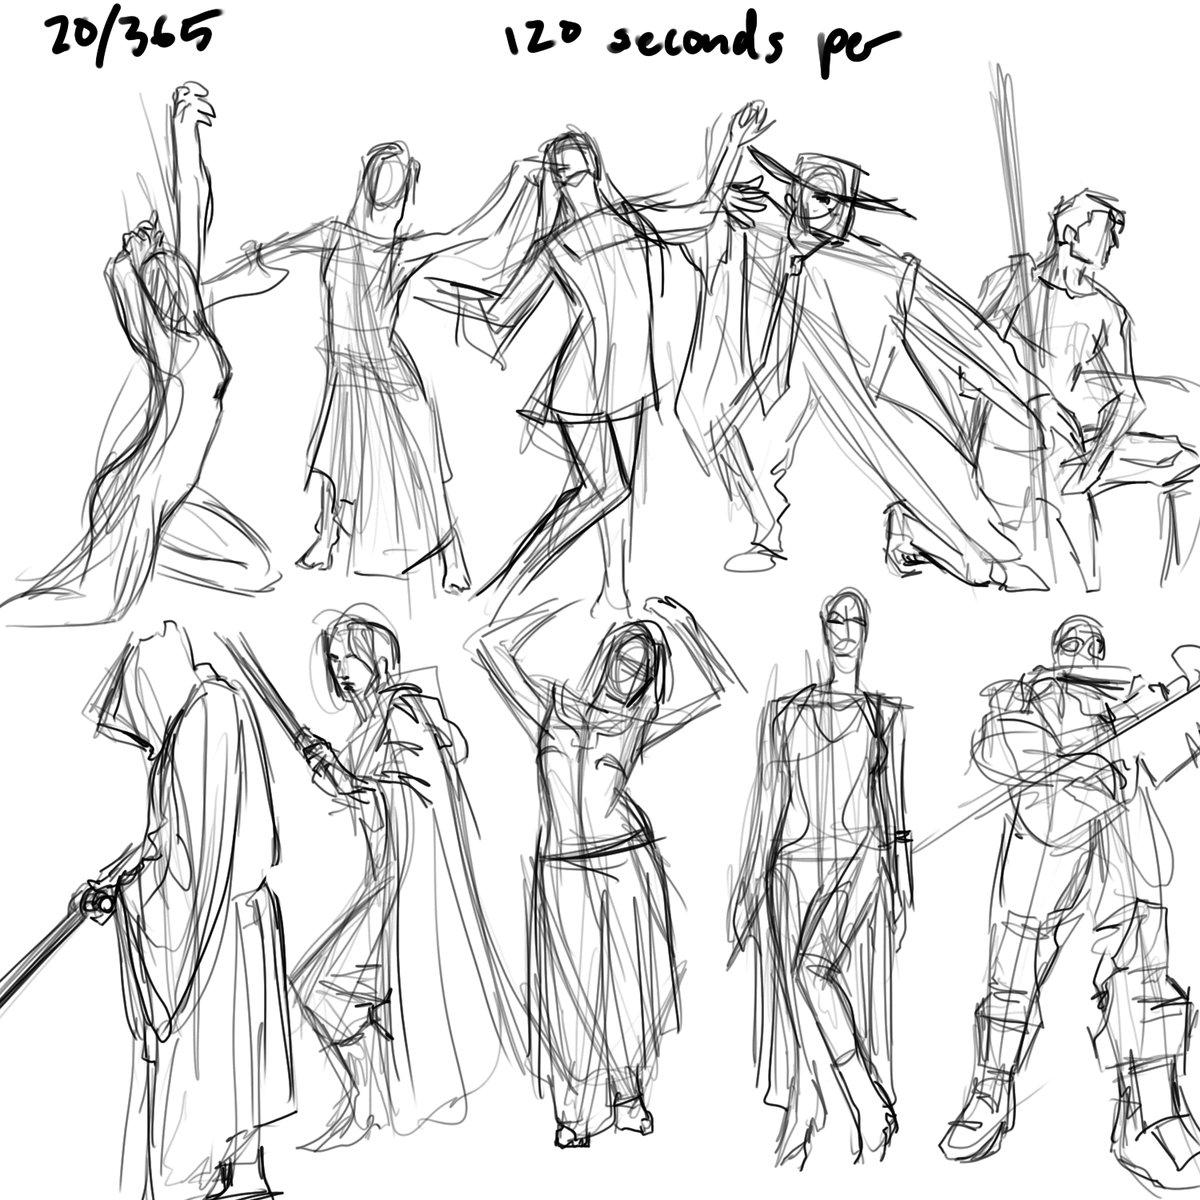 more gesture sketches from stream 